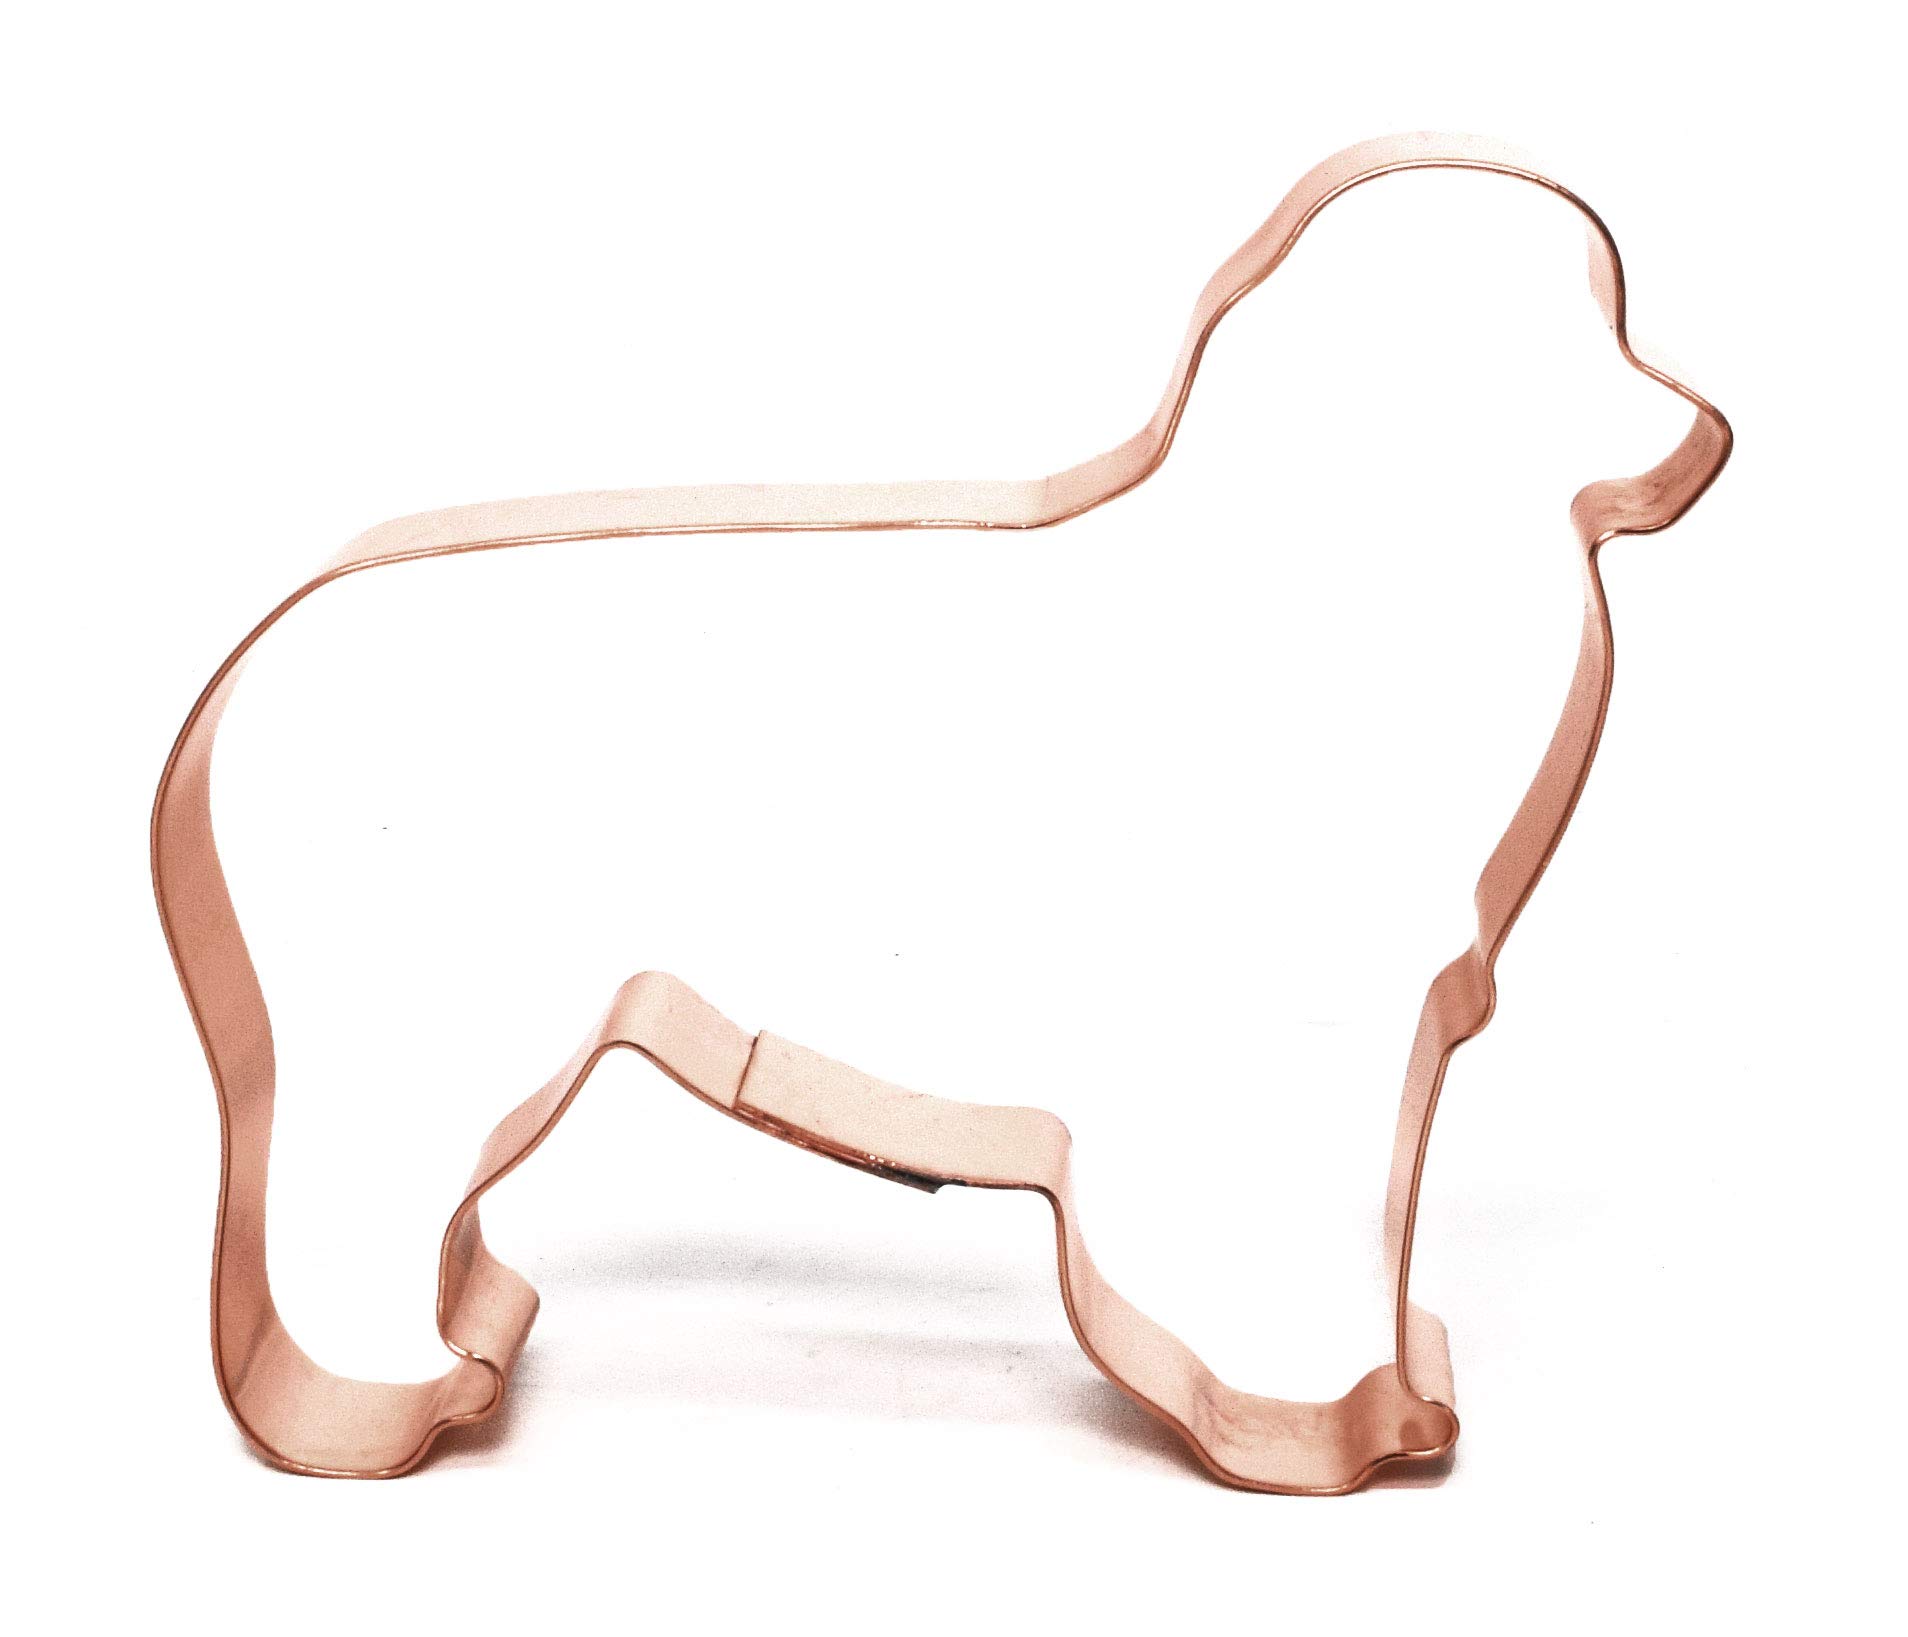 Australian Shepherd Dog Breed Cookie Cutter 4.25 X 3.7 inches - Handcrafted Copper Cookie Cutter by The Fussy Pup